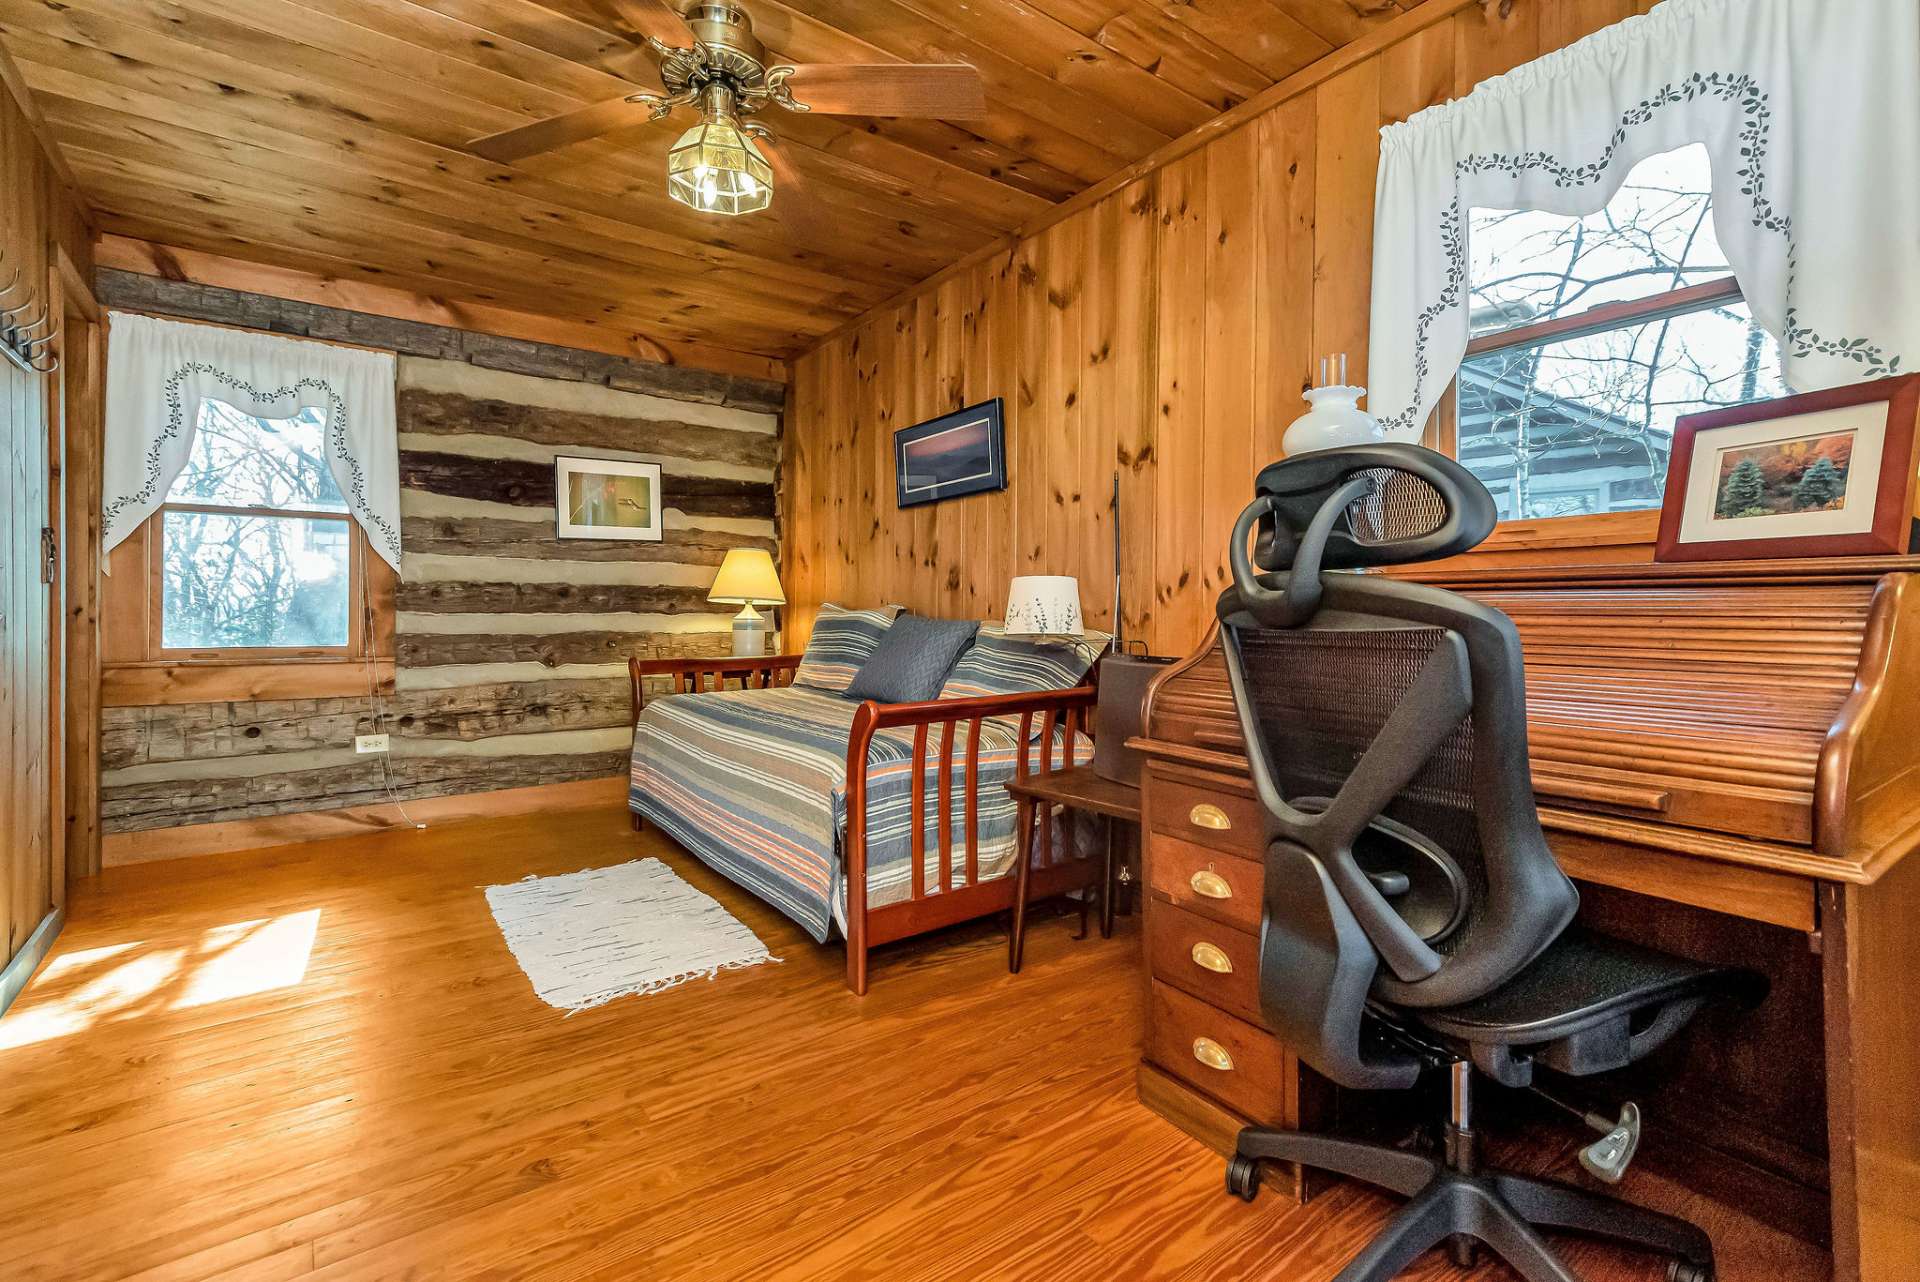 Just off the great room is a versatile bonus room/office with walk-in closet.